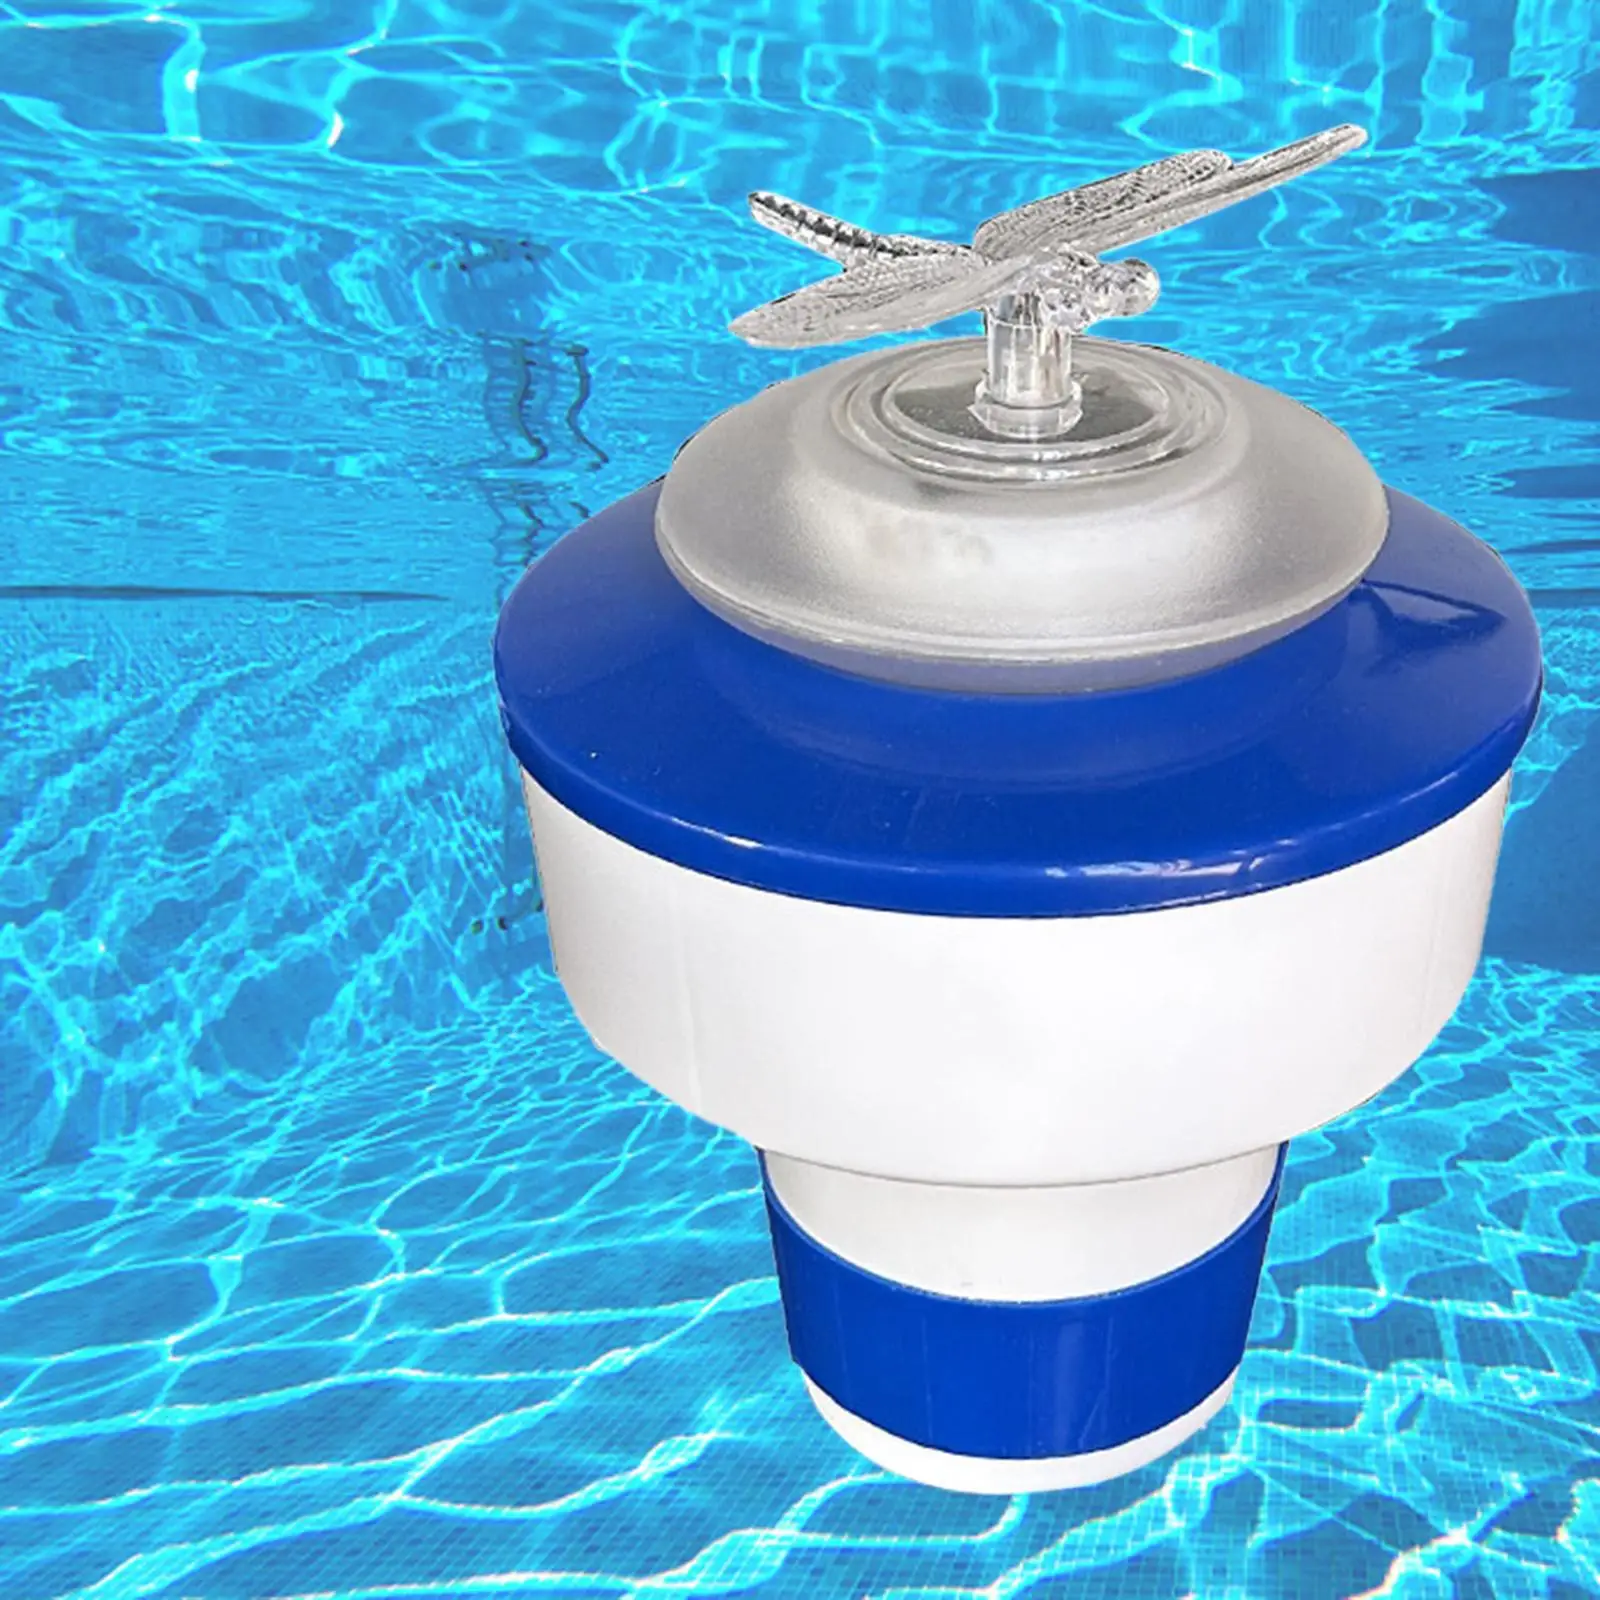 Pool Chlorine Floater Solar Fits 1 and 3 inch Tablets Floating Chlorine Dispenser for Pool for Hot Tubs Indoor Outdoor Accessory